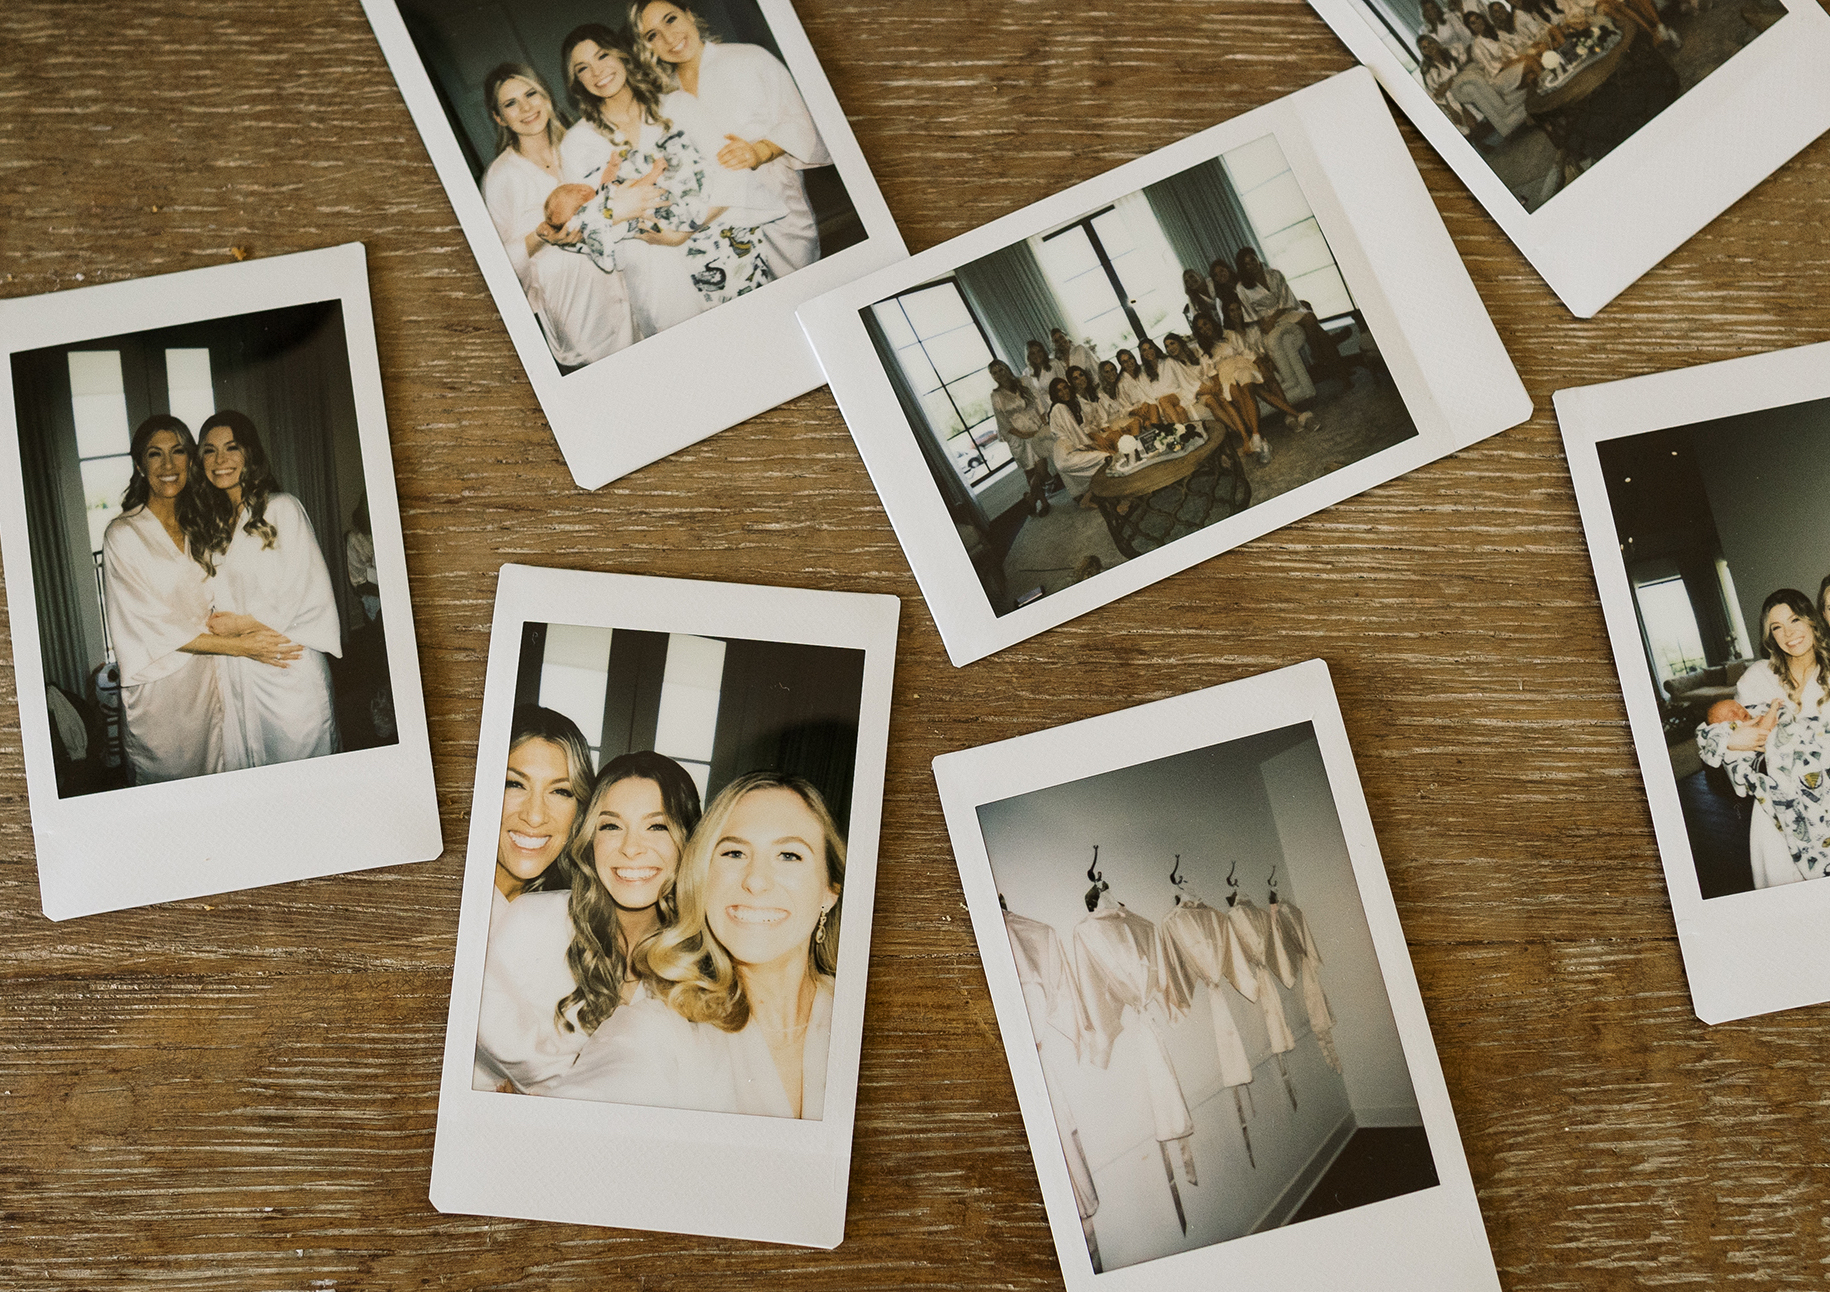 Polaroid photos of the bride and her bridesmaids before their timeless wedding.